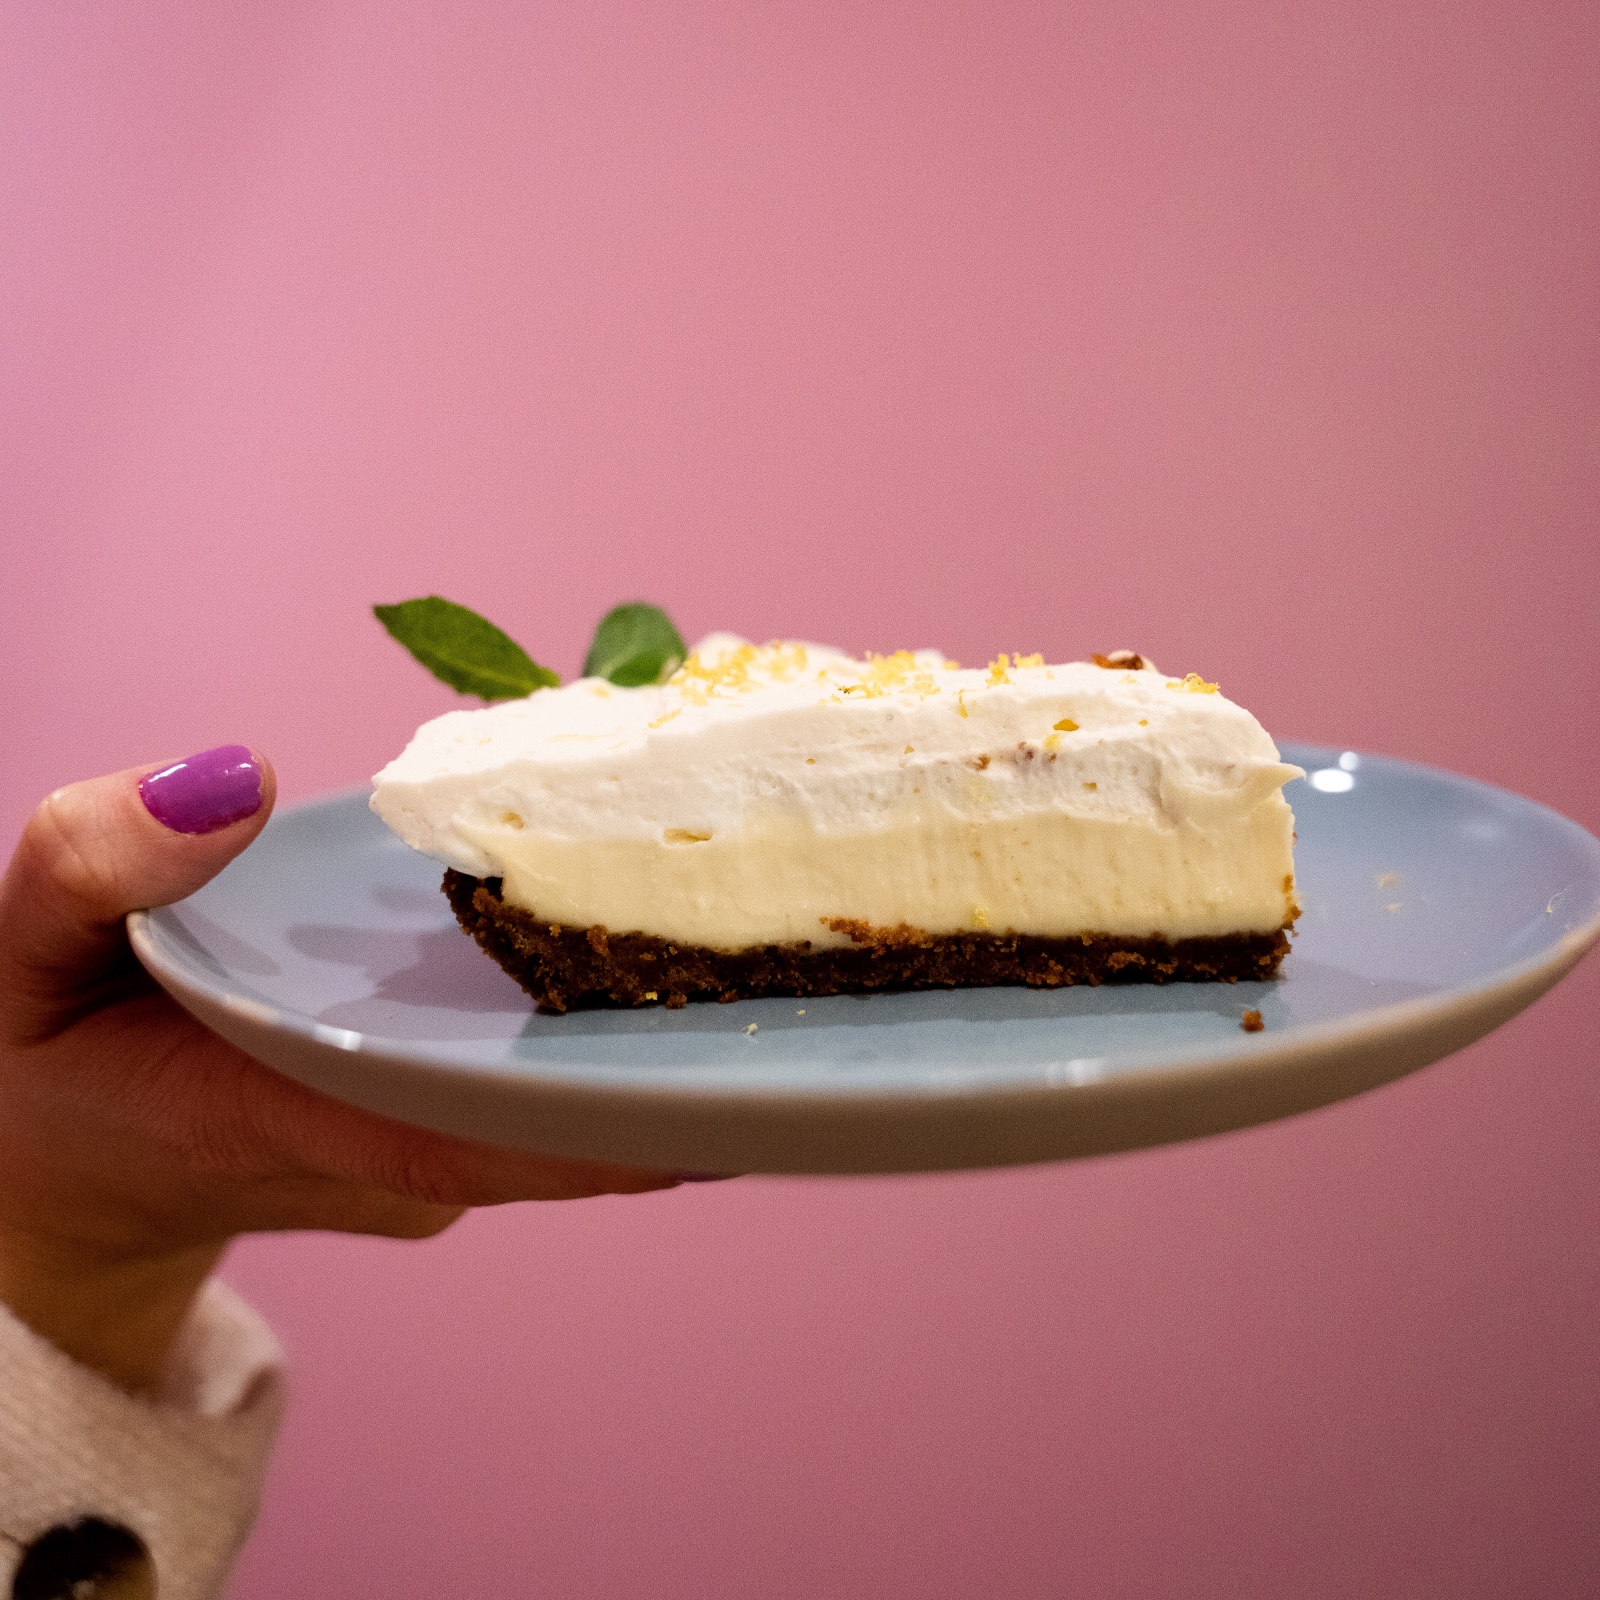 Tips and tricks for taking stunning photos of delectable pies.